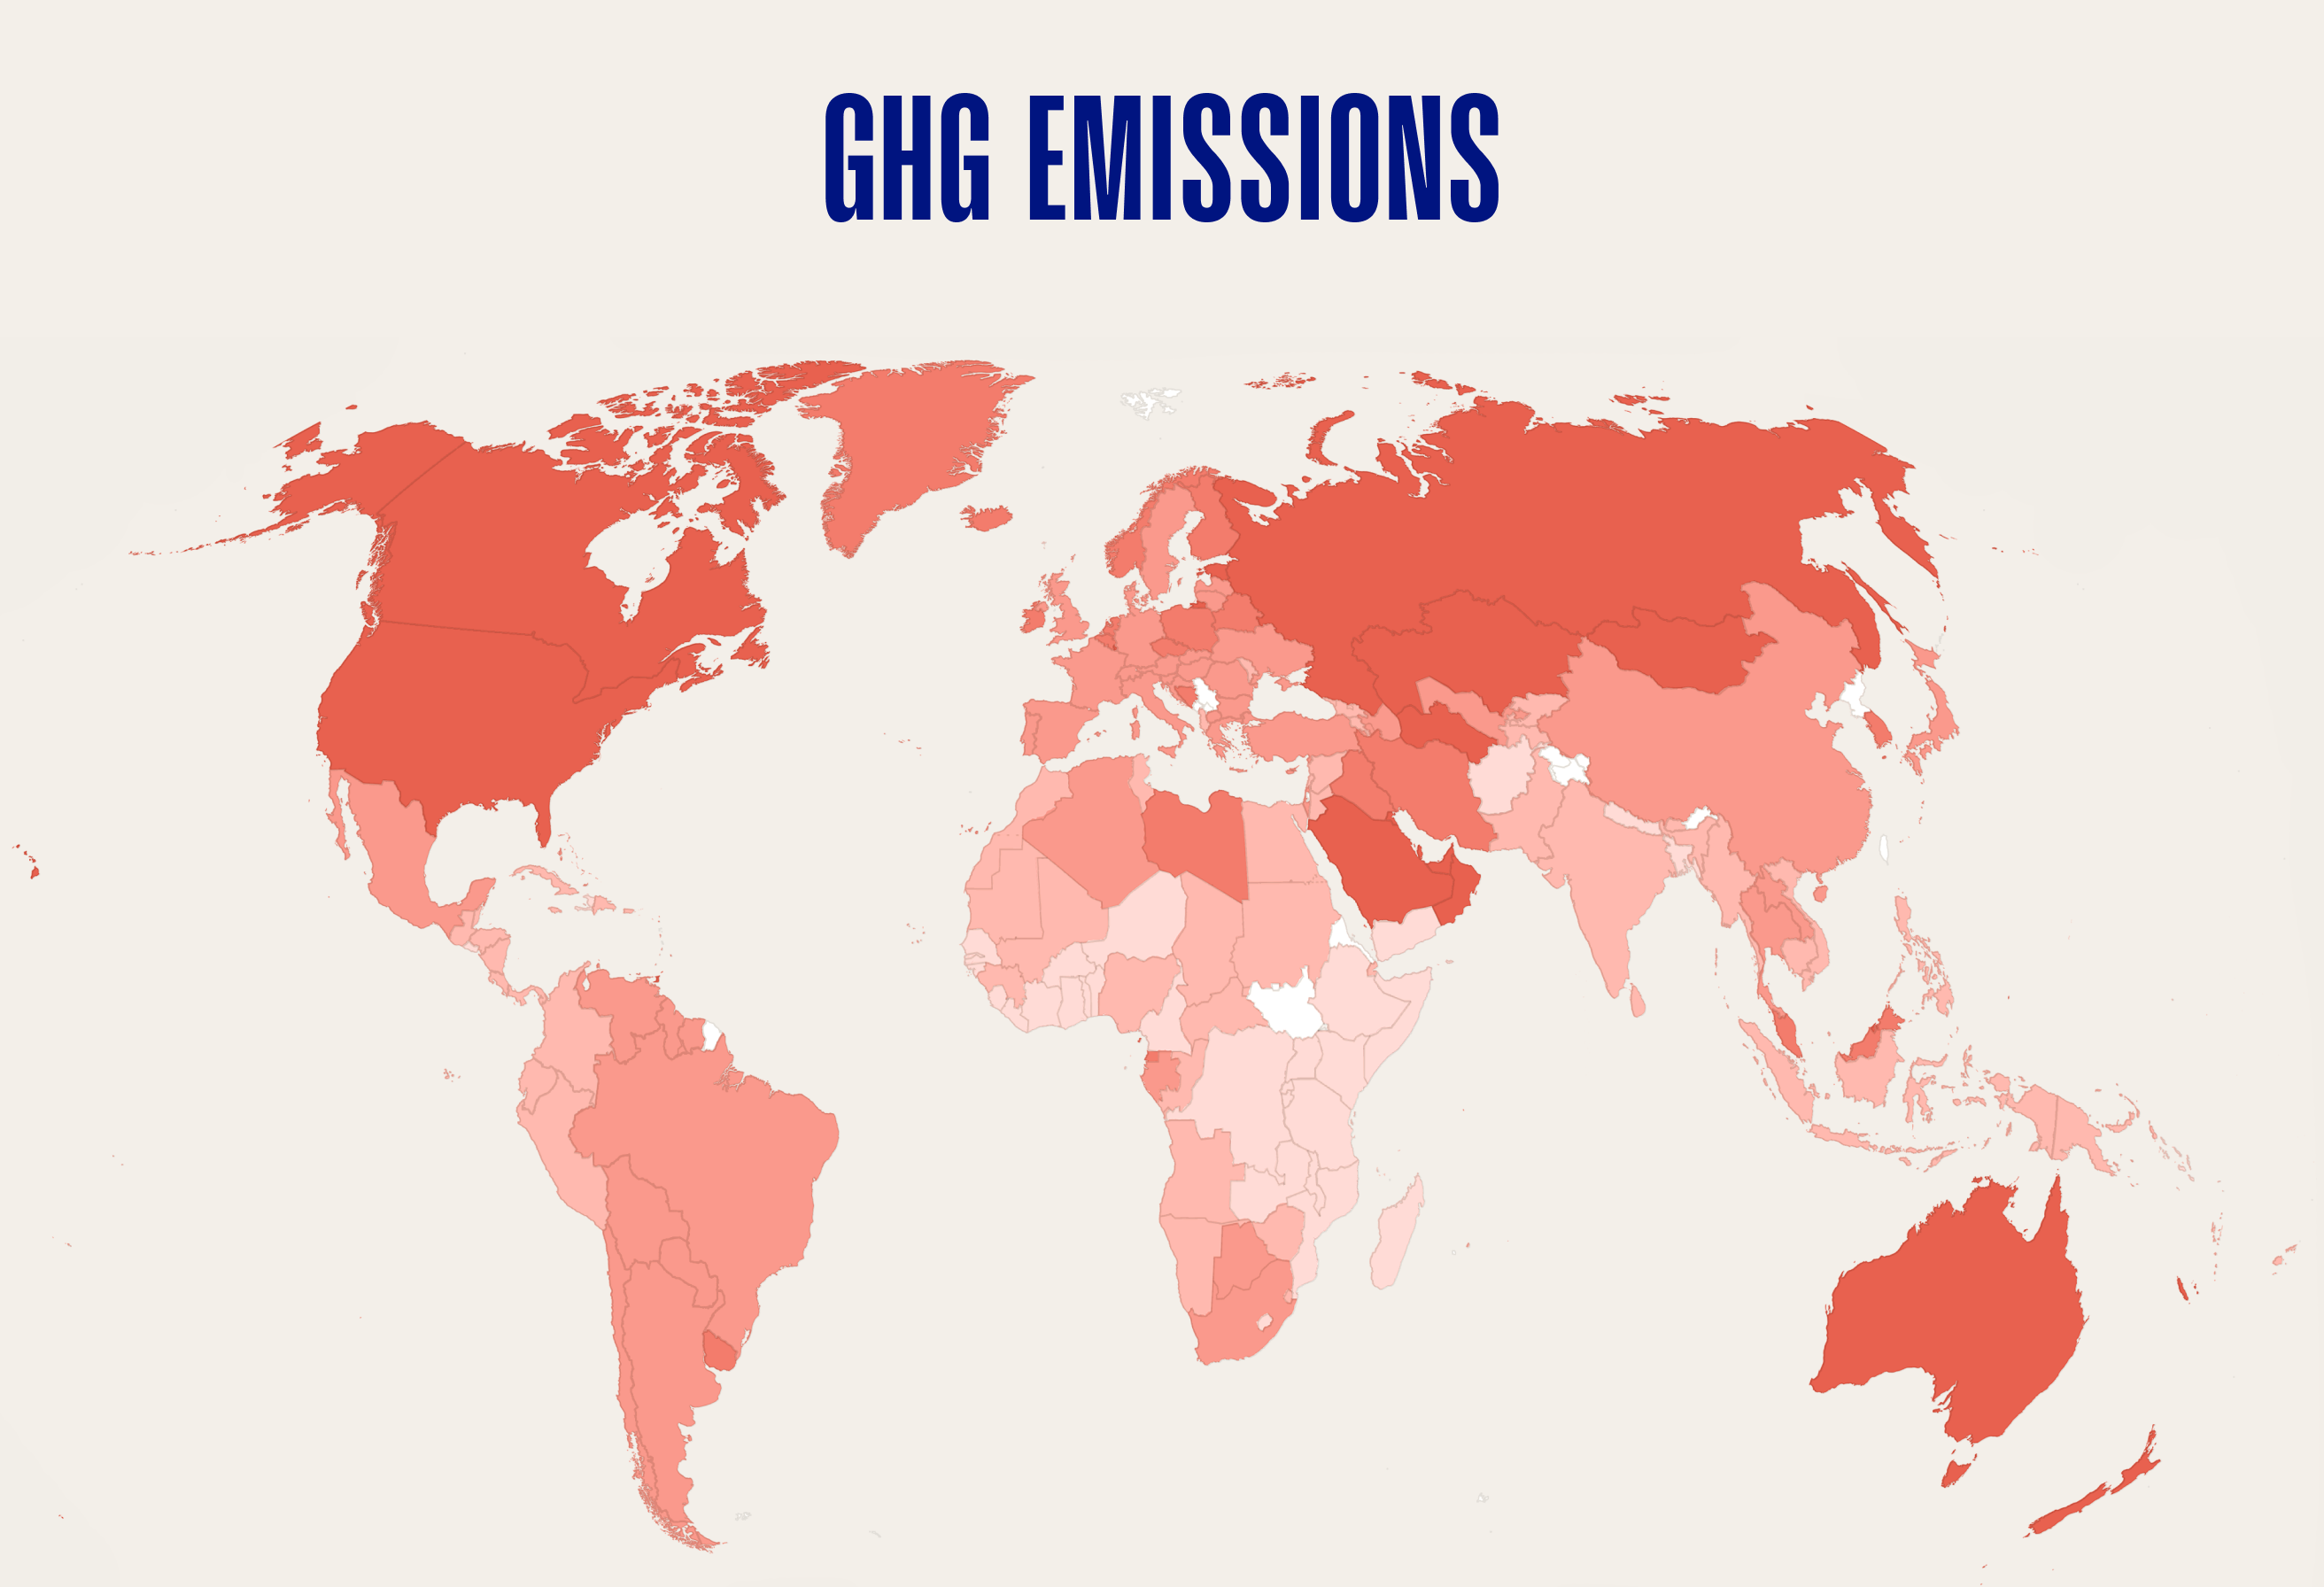 Despite their lower contributions to global greenhouse gas emissions,